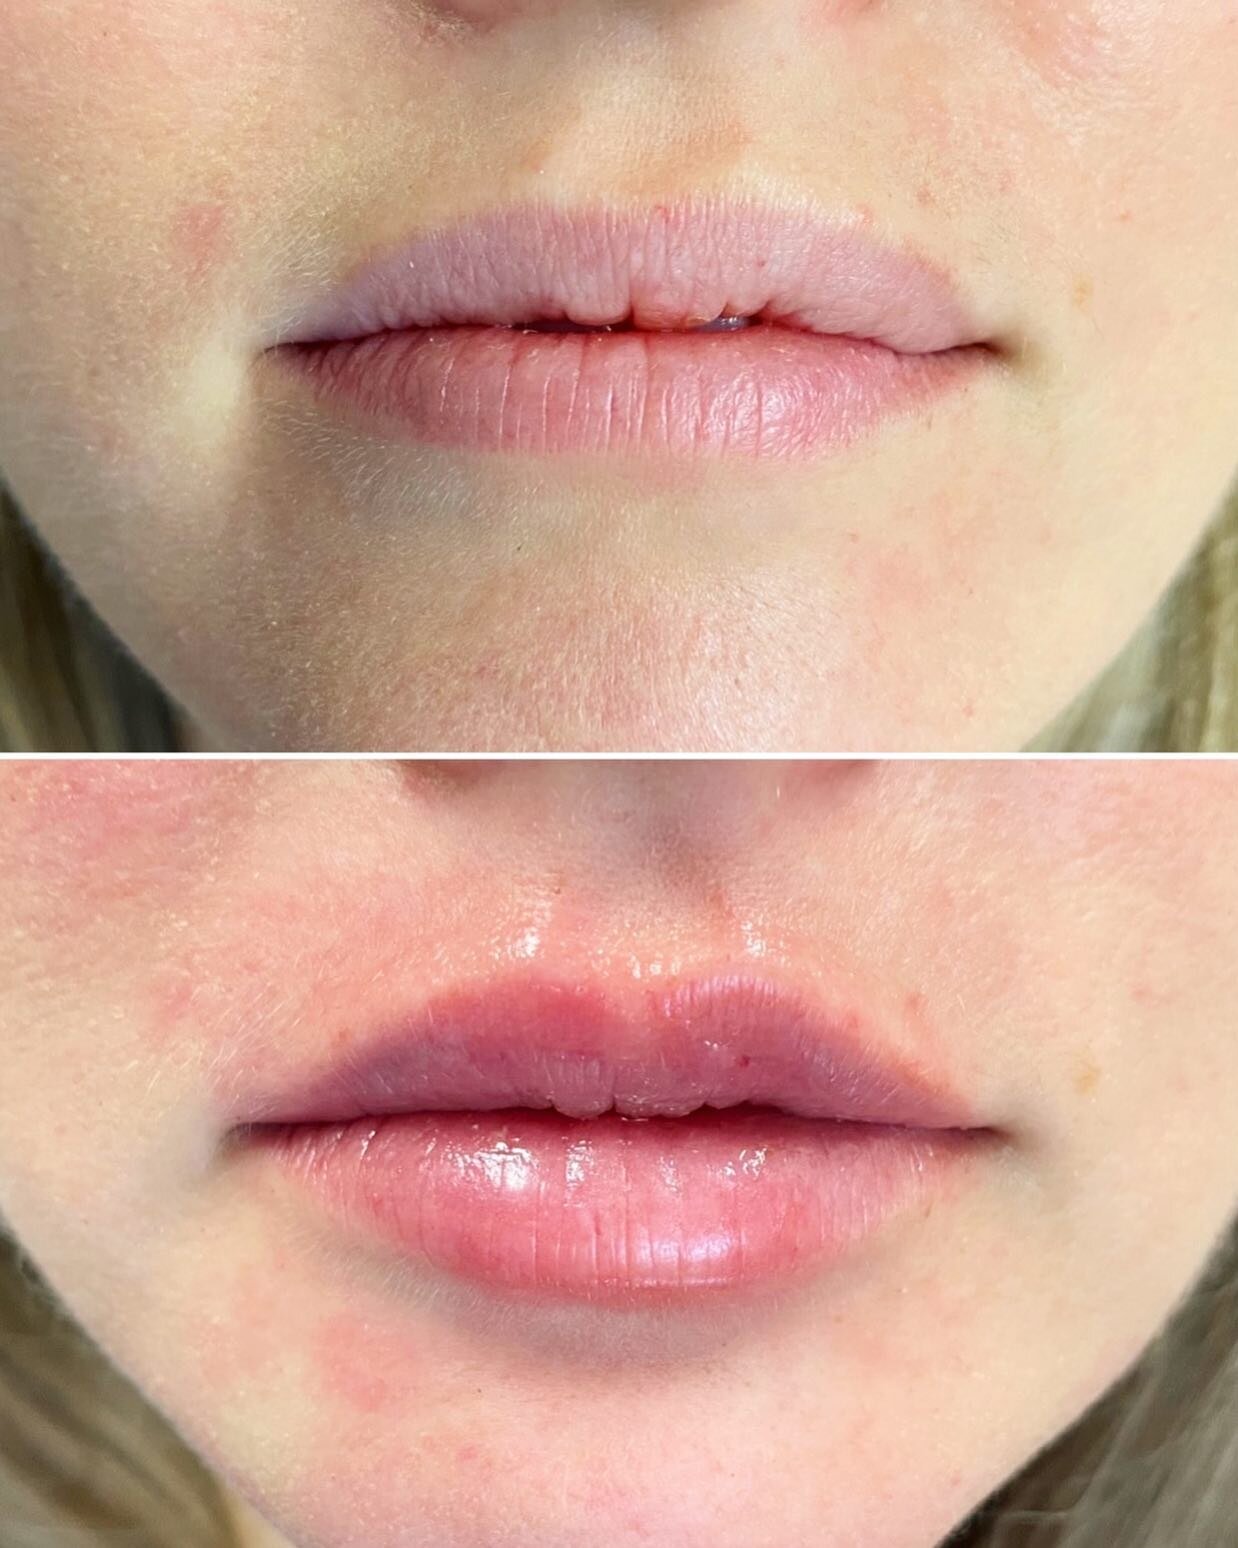 Before and After
We used 1 syringe of Juvederm Volbella in the upper and lower lips. She looks so good! 😍